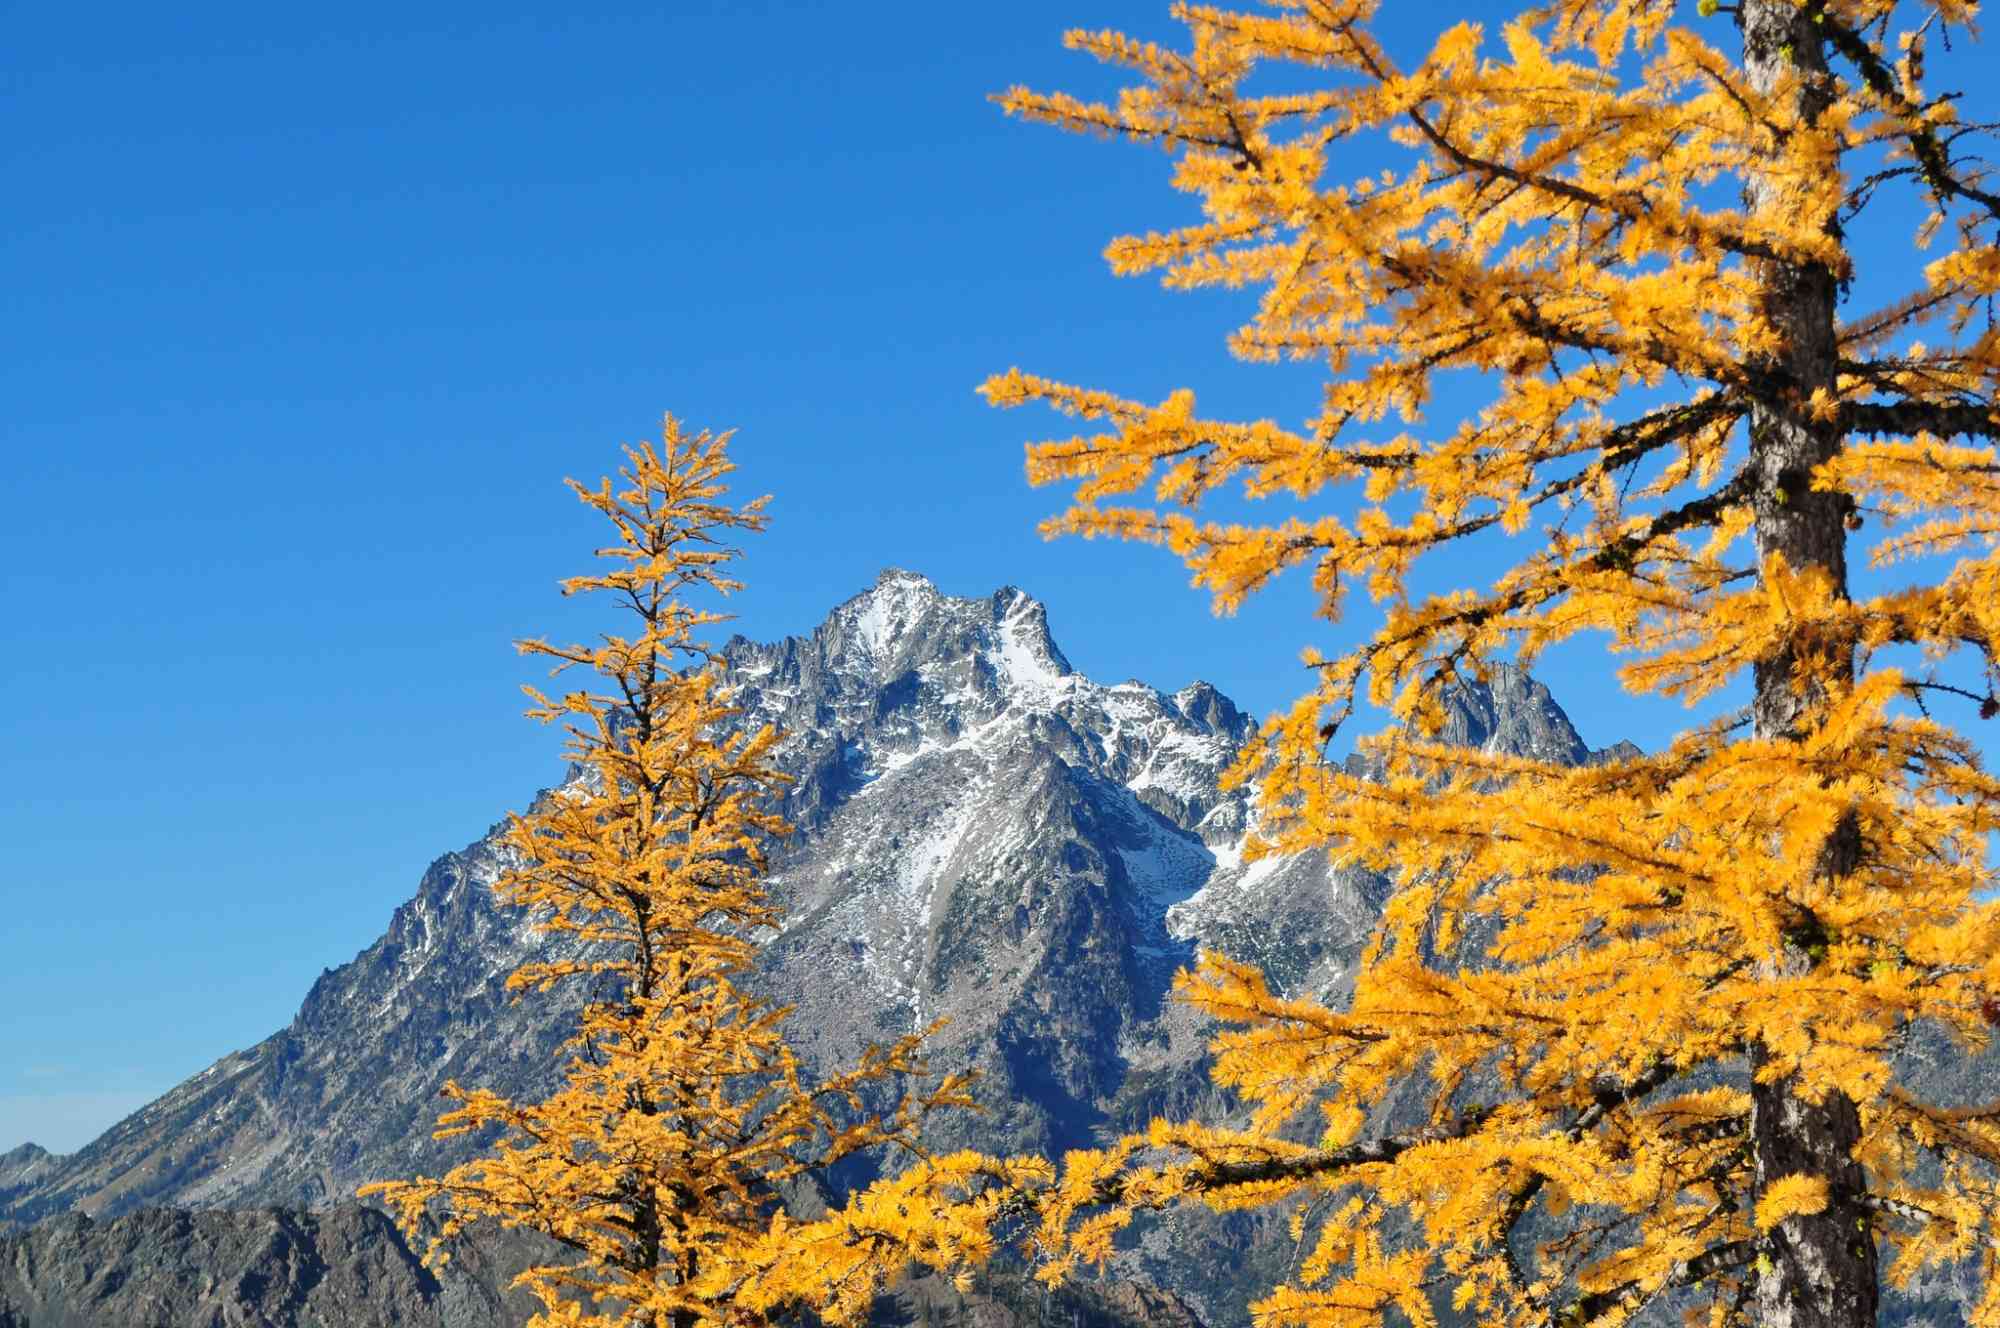 The fall color of a subalpine larch (Larix lyallii) set against Mt. Stewart on the Cle Elum Ranger District, Okanogan-Wenatchee National Forest.